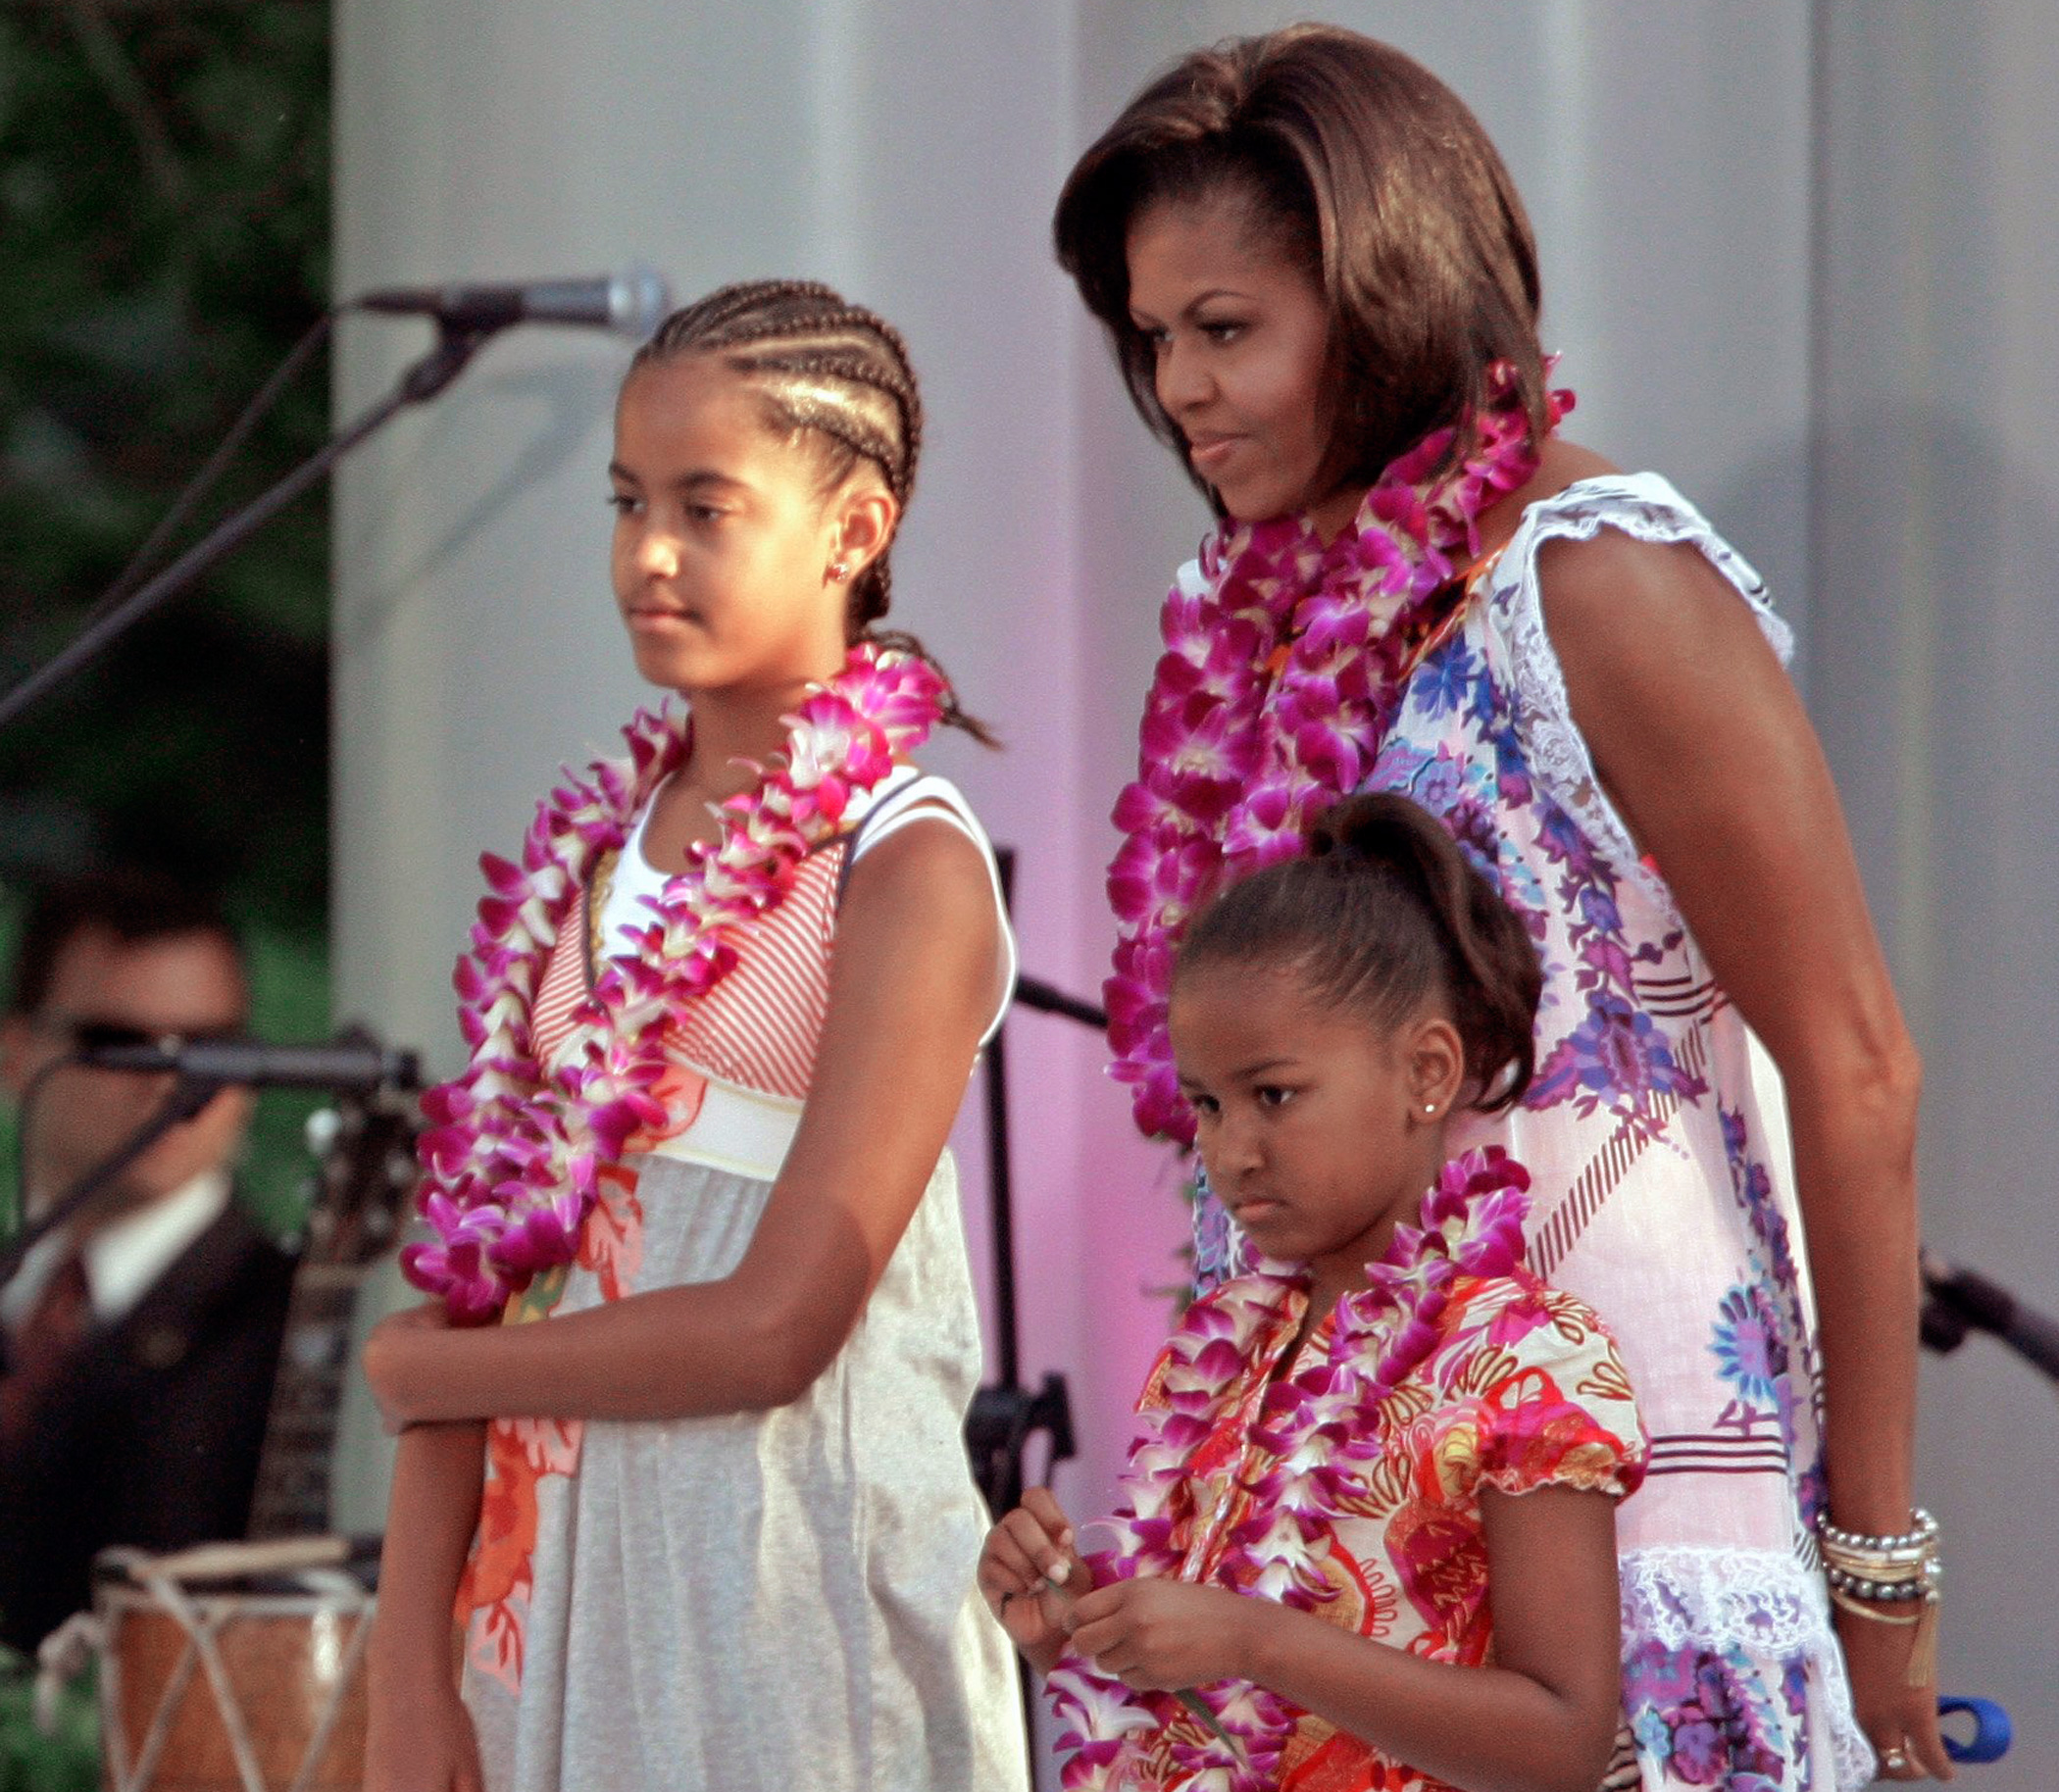 June 25, 2009 Malia Obama with mother Michelle and sister Sasha, attend a luau hosted by the president on the South Lawn of the White House for members of Congress and their families.